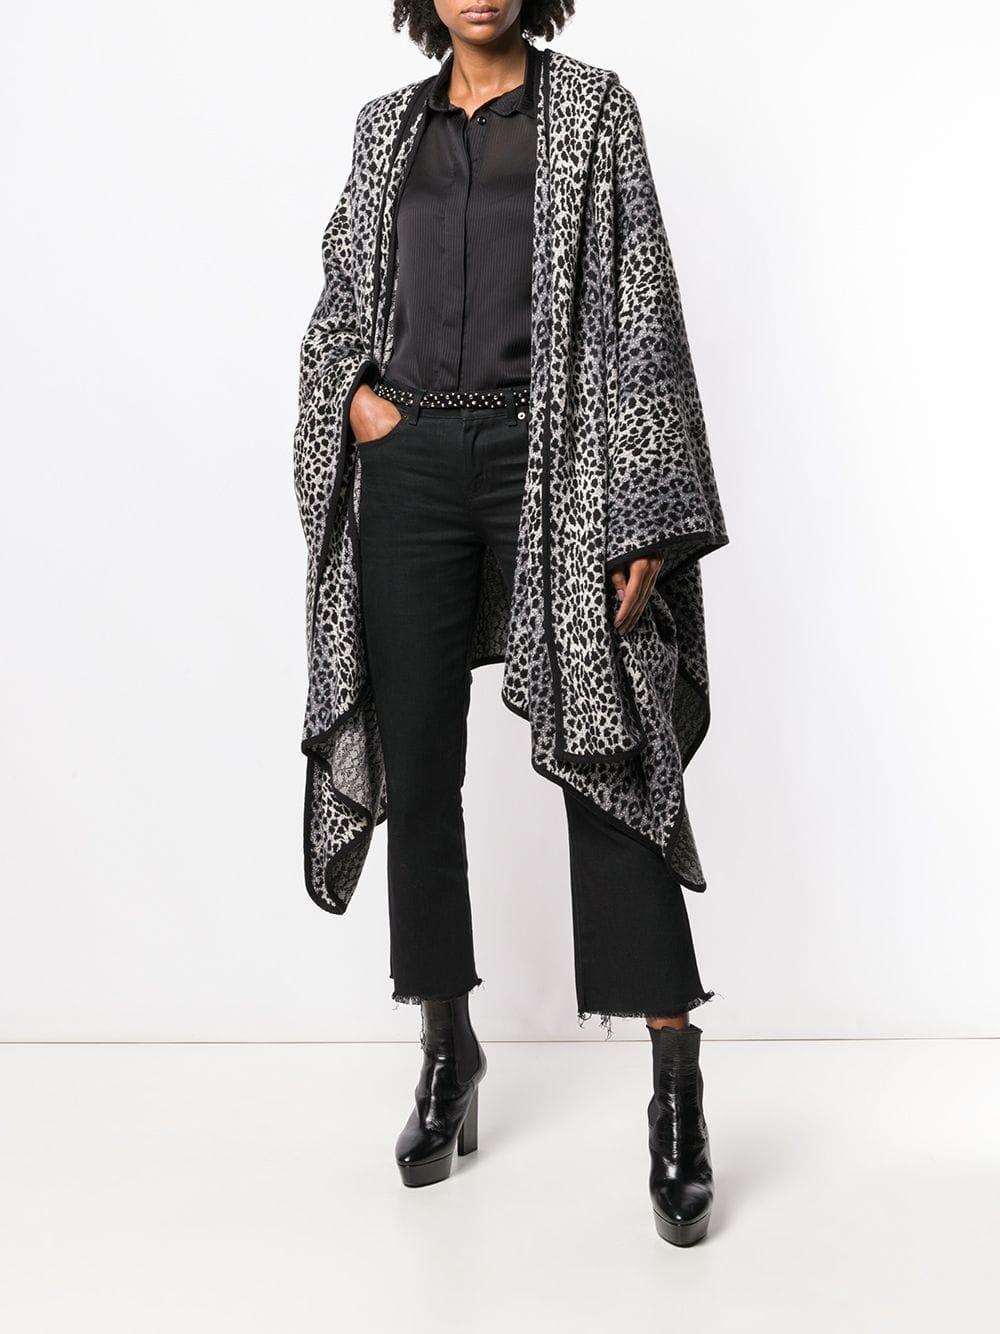 Stylish Yves Saint Laurent black, white and grey animalier print poncho-style oversize cape, opened long sleeves, no closure, mid-length asymmetrical hem and black edges. It includes a detachable hood with long flaps that look like a scarf.
Years: